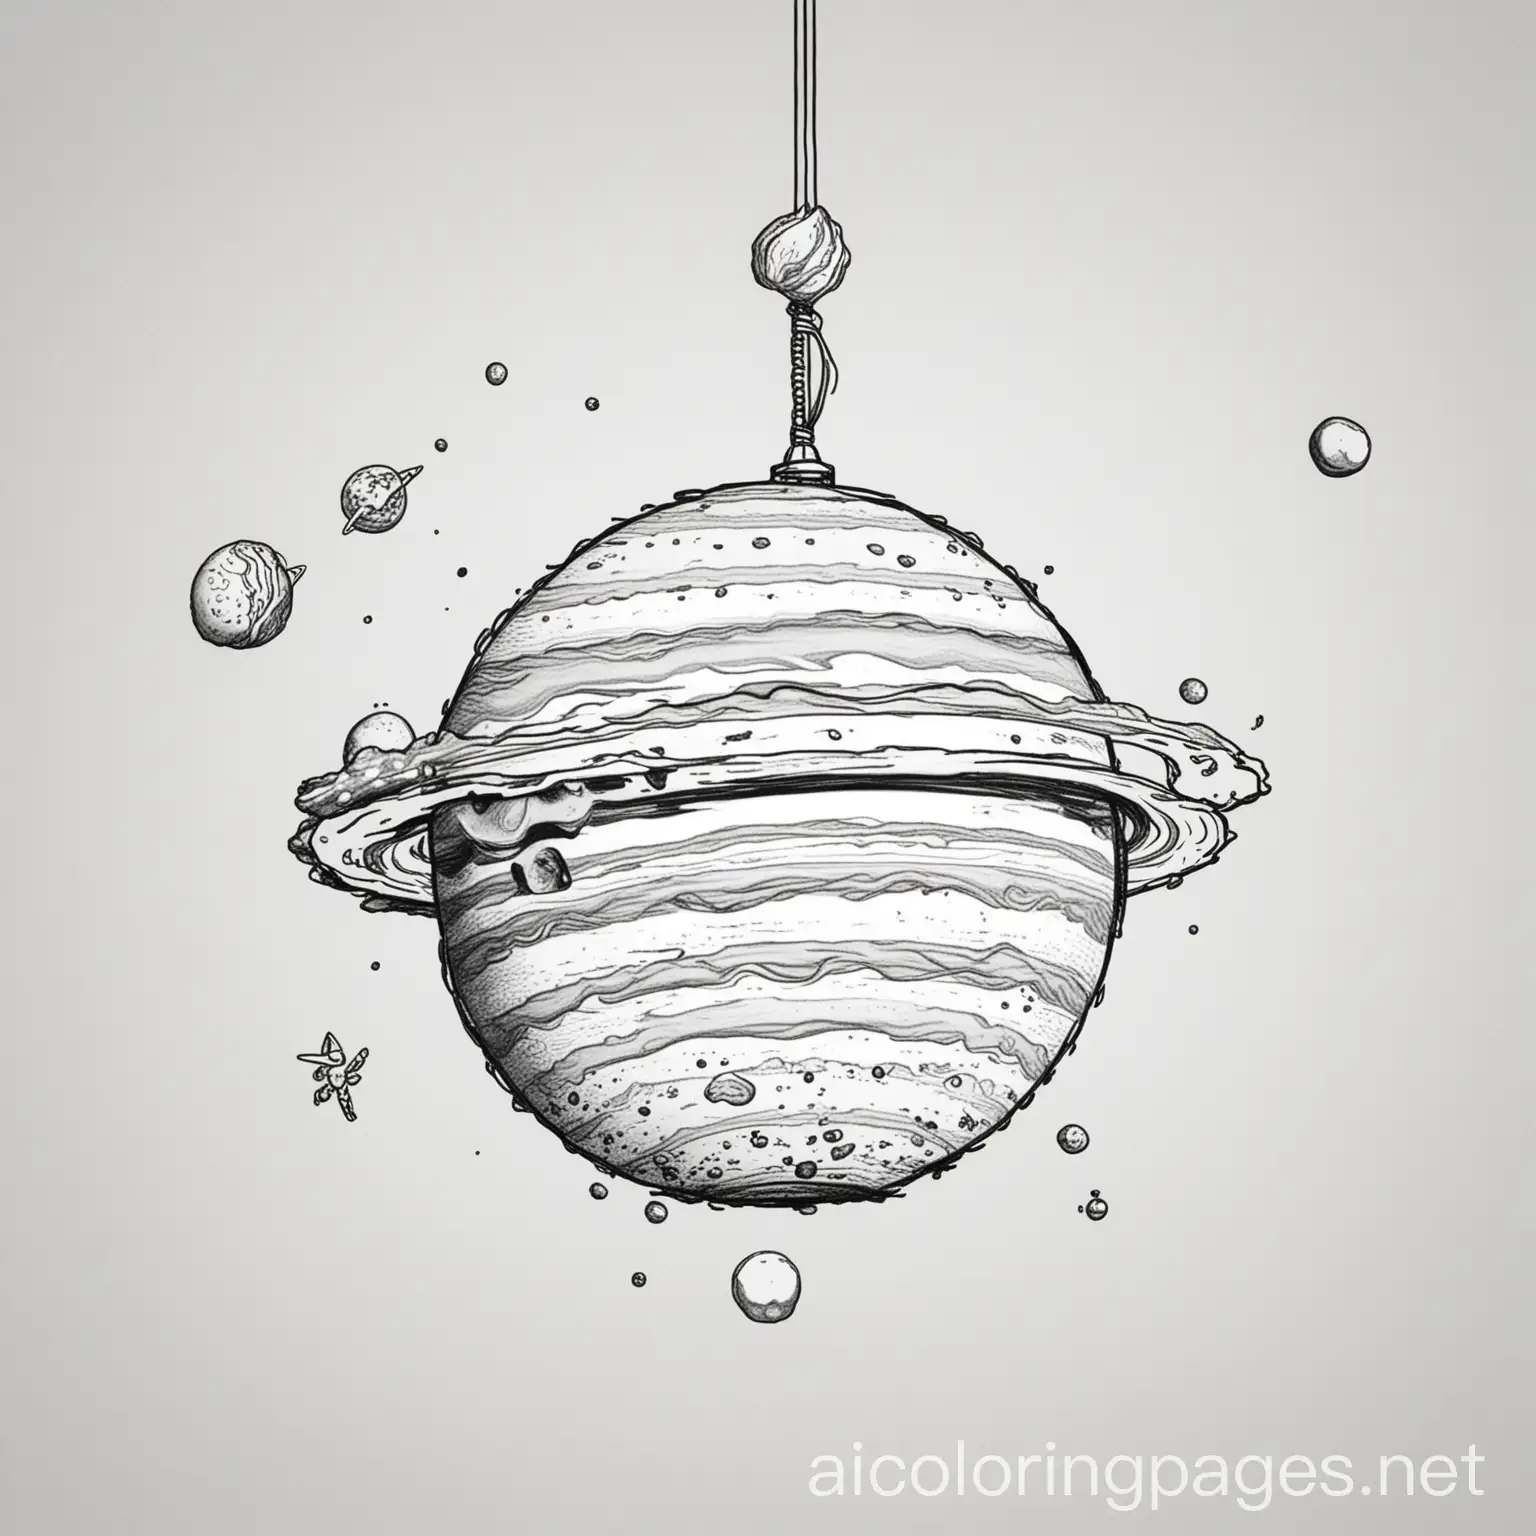 just hanging around with jupiter being silly in space, Coloring Page, black and white, line art, white background, Simplicity, Ample White Space